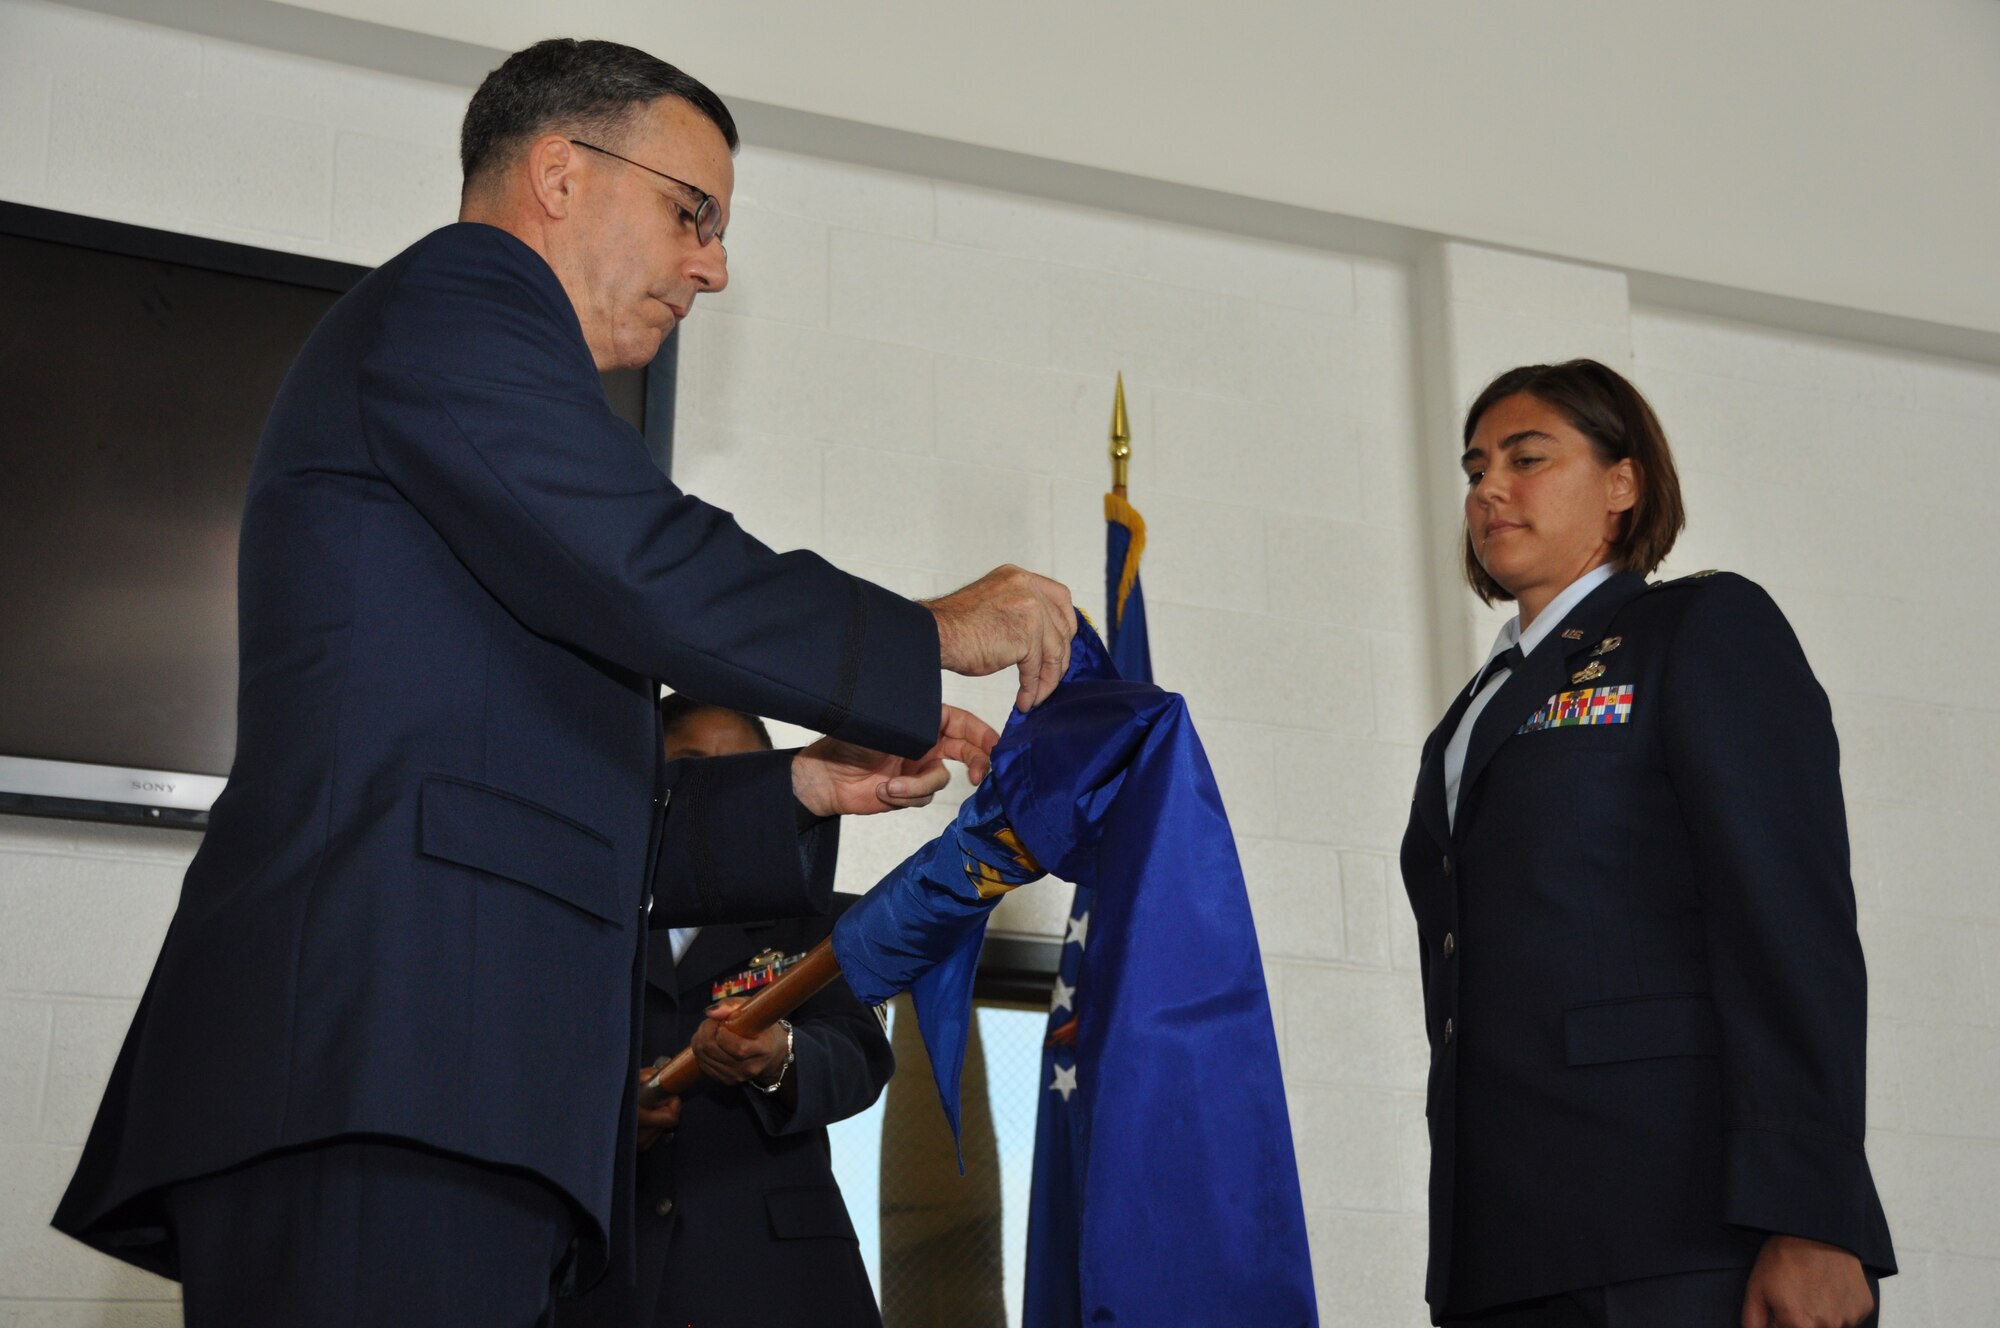 U.S. Air Force Col. Donald Robison, 459th Maintenance Group commander, puts a sleeve on the retired flag and guidon for the 459th Maintenance Operations Flight with Air Force Lt. Col. Erica Foster, 459 MOF commander, in an inactivation ceremony at Joint Base Andrews, Md., July 13, 2013. The 459 MOF was inactivated due to Air Force budgetary decisions and reorganization within the Air Force. (U.S. Air Force photo by Staff Sgt. Brent A. Skeen)